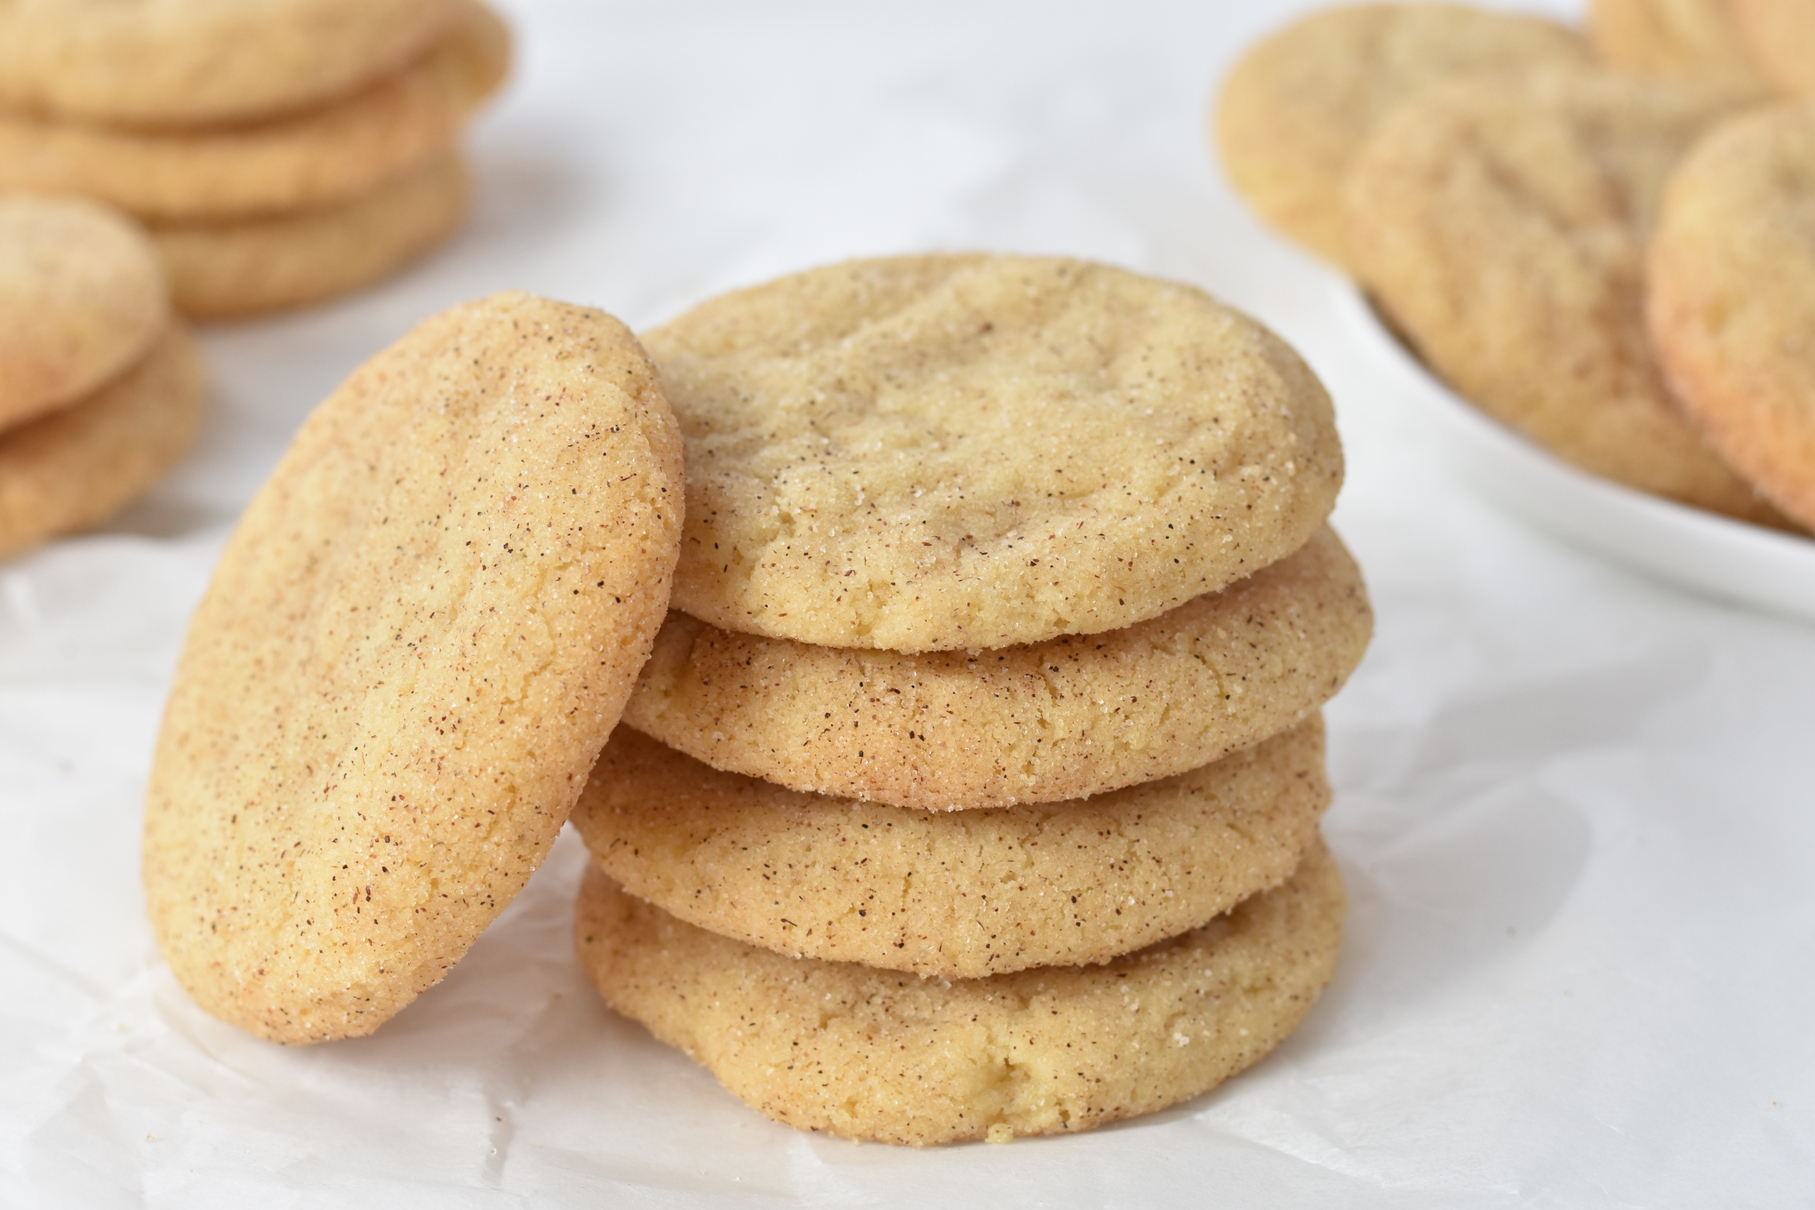 Snickerdoodles Stacked in a Pile